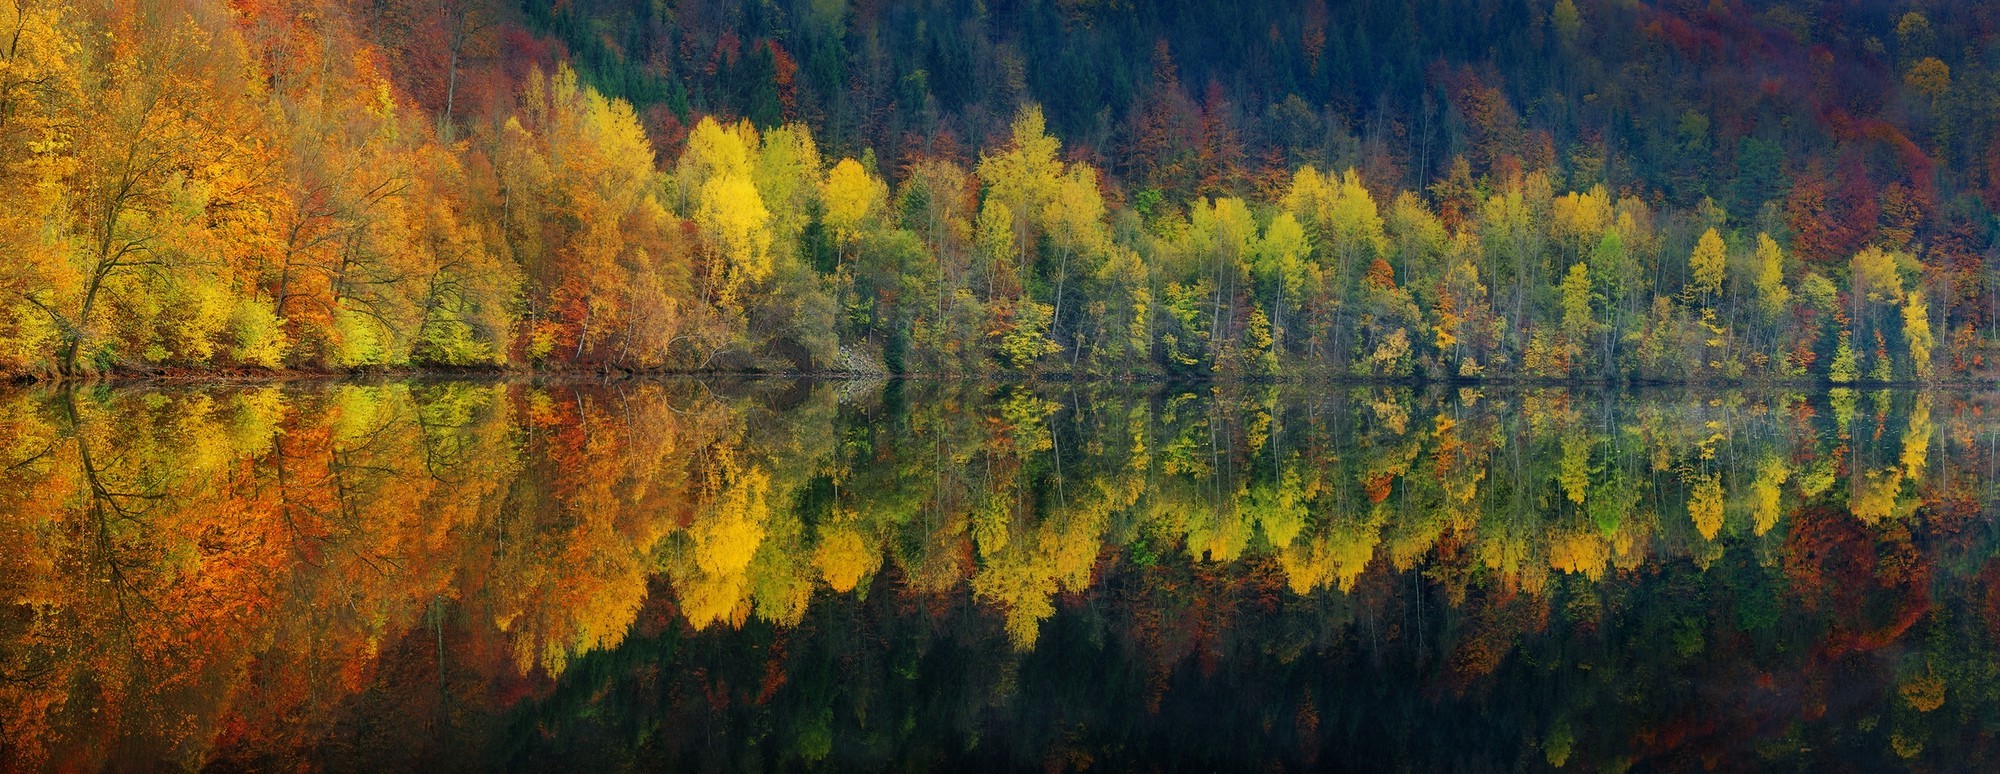 panoramas, Lake, Reflection, Nature, Fall, Water, Forest, Landscape, Trees, Calm, Mountain, Colorful Wallpaper